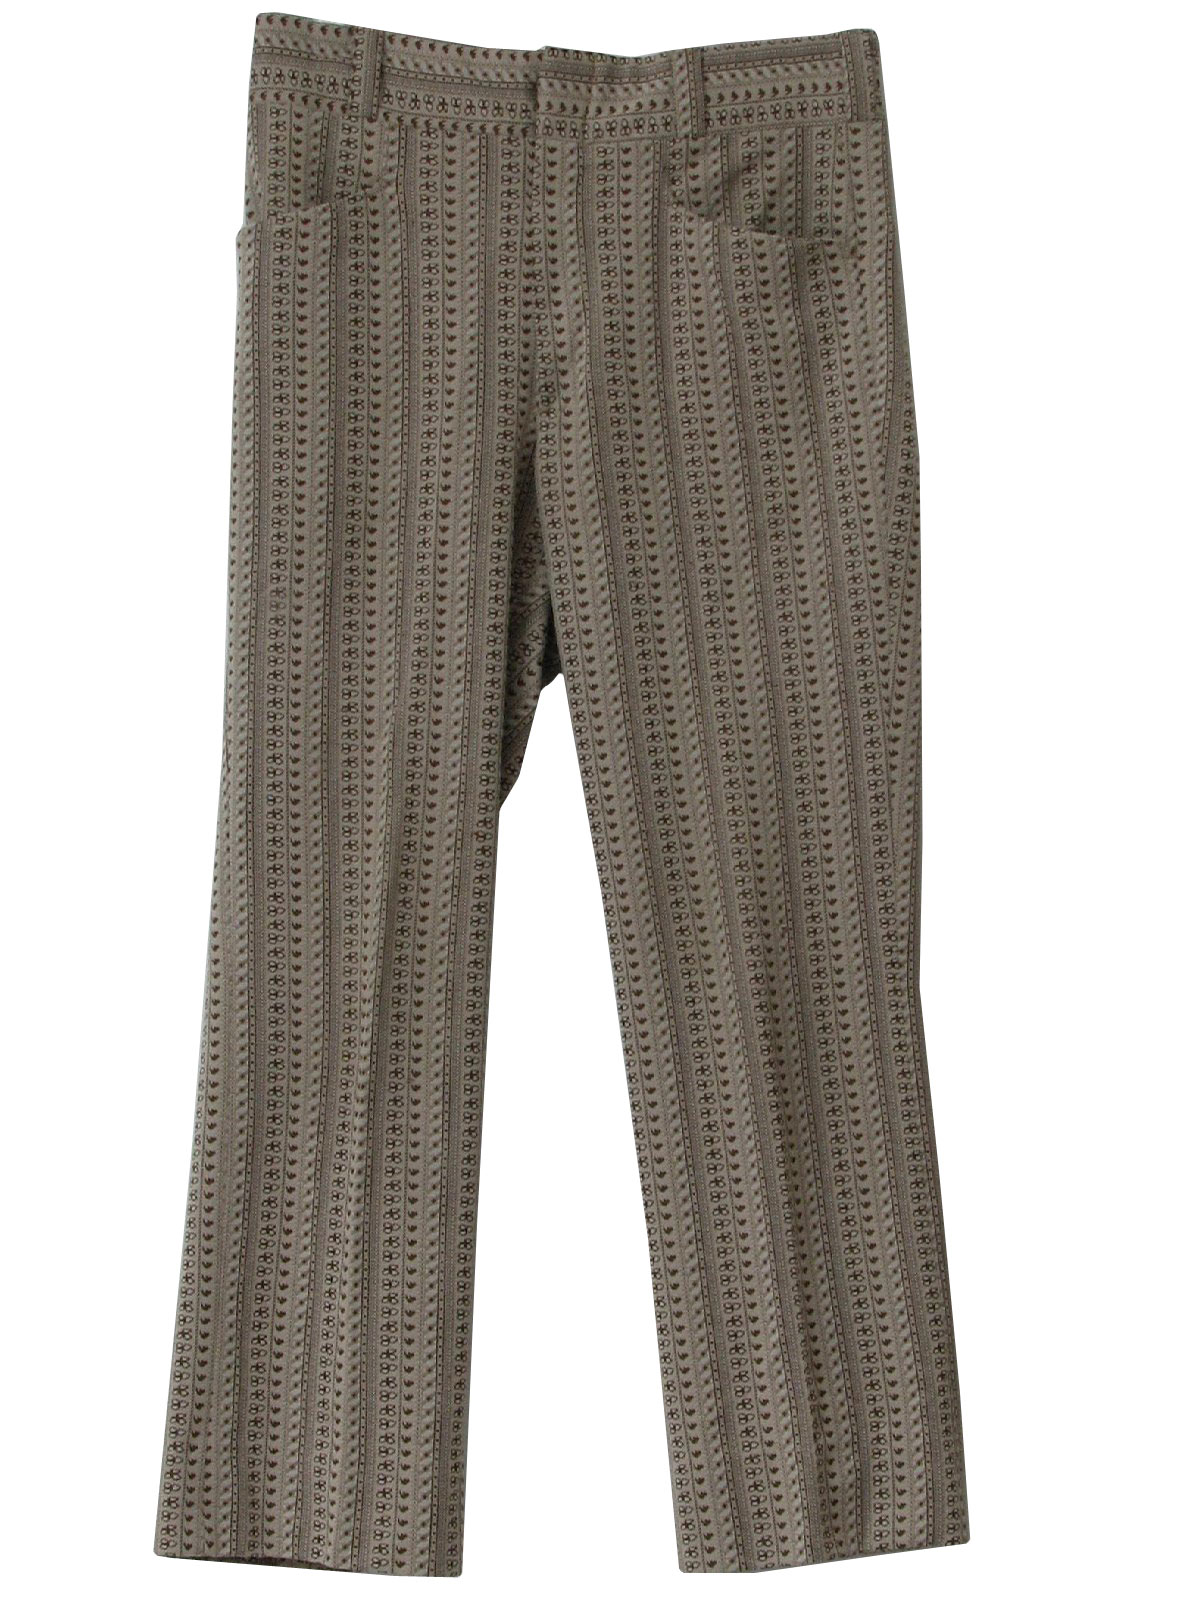 Seventies Vintage Flared Pants / Flares: 70s -Coventry Square Trousers ...